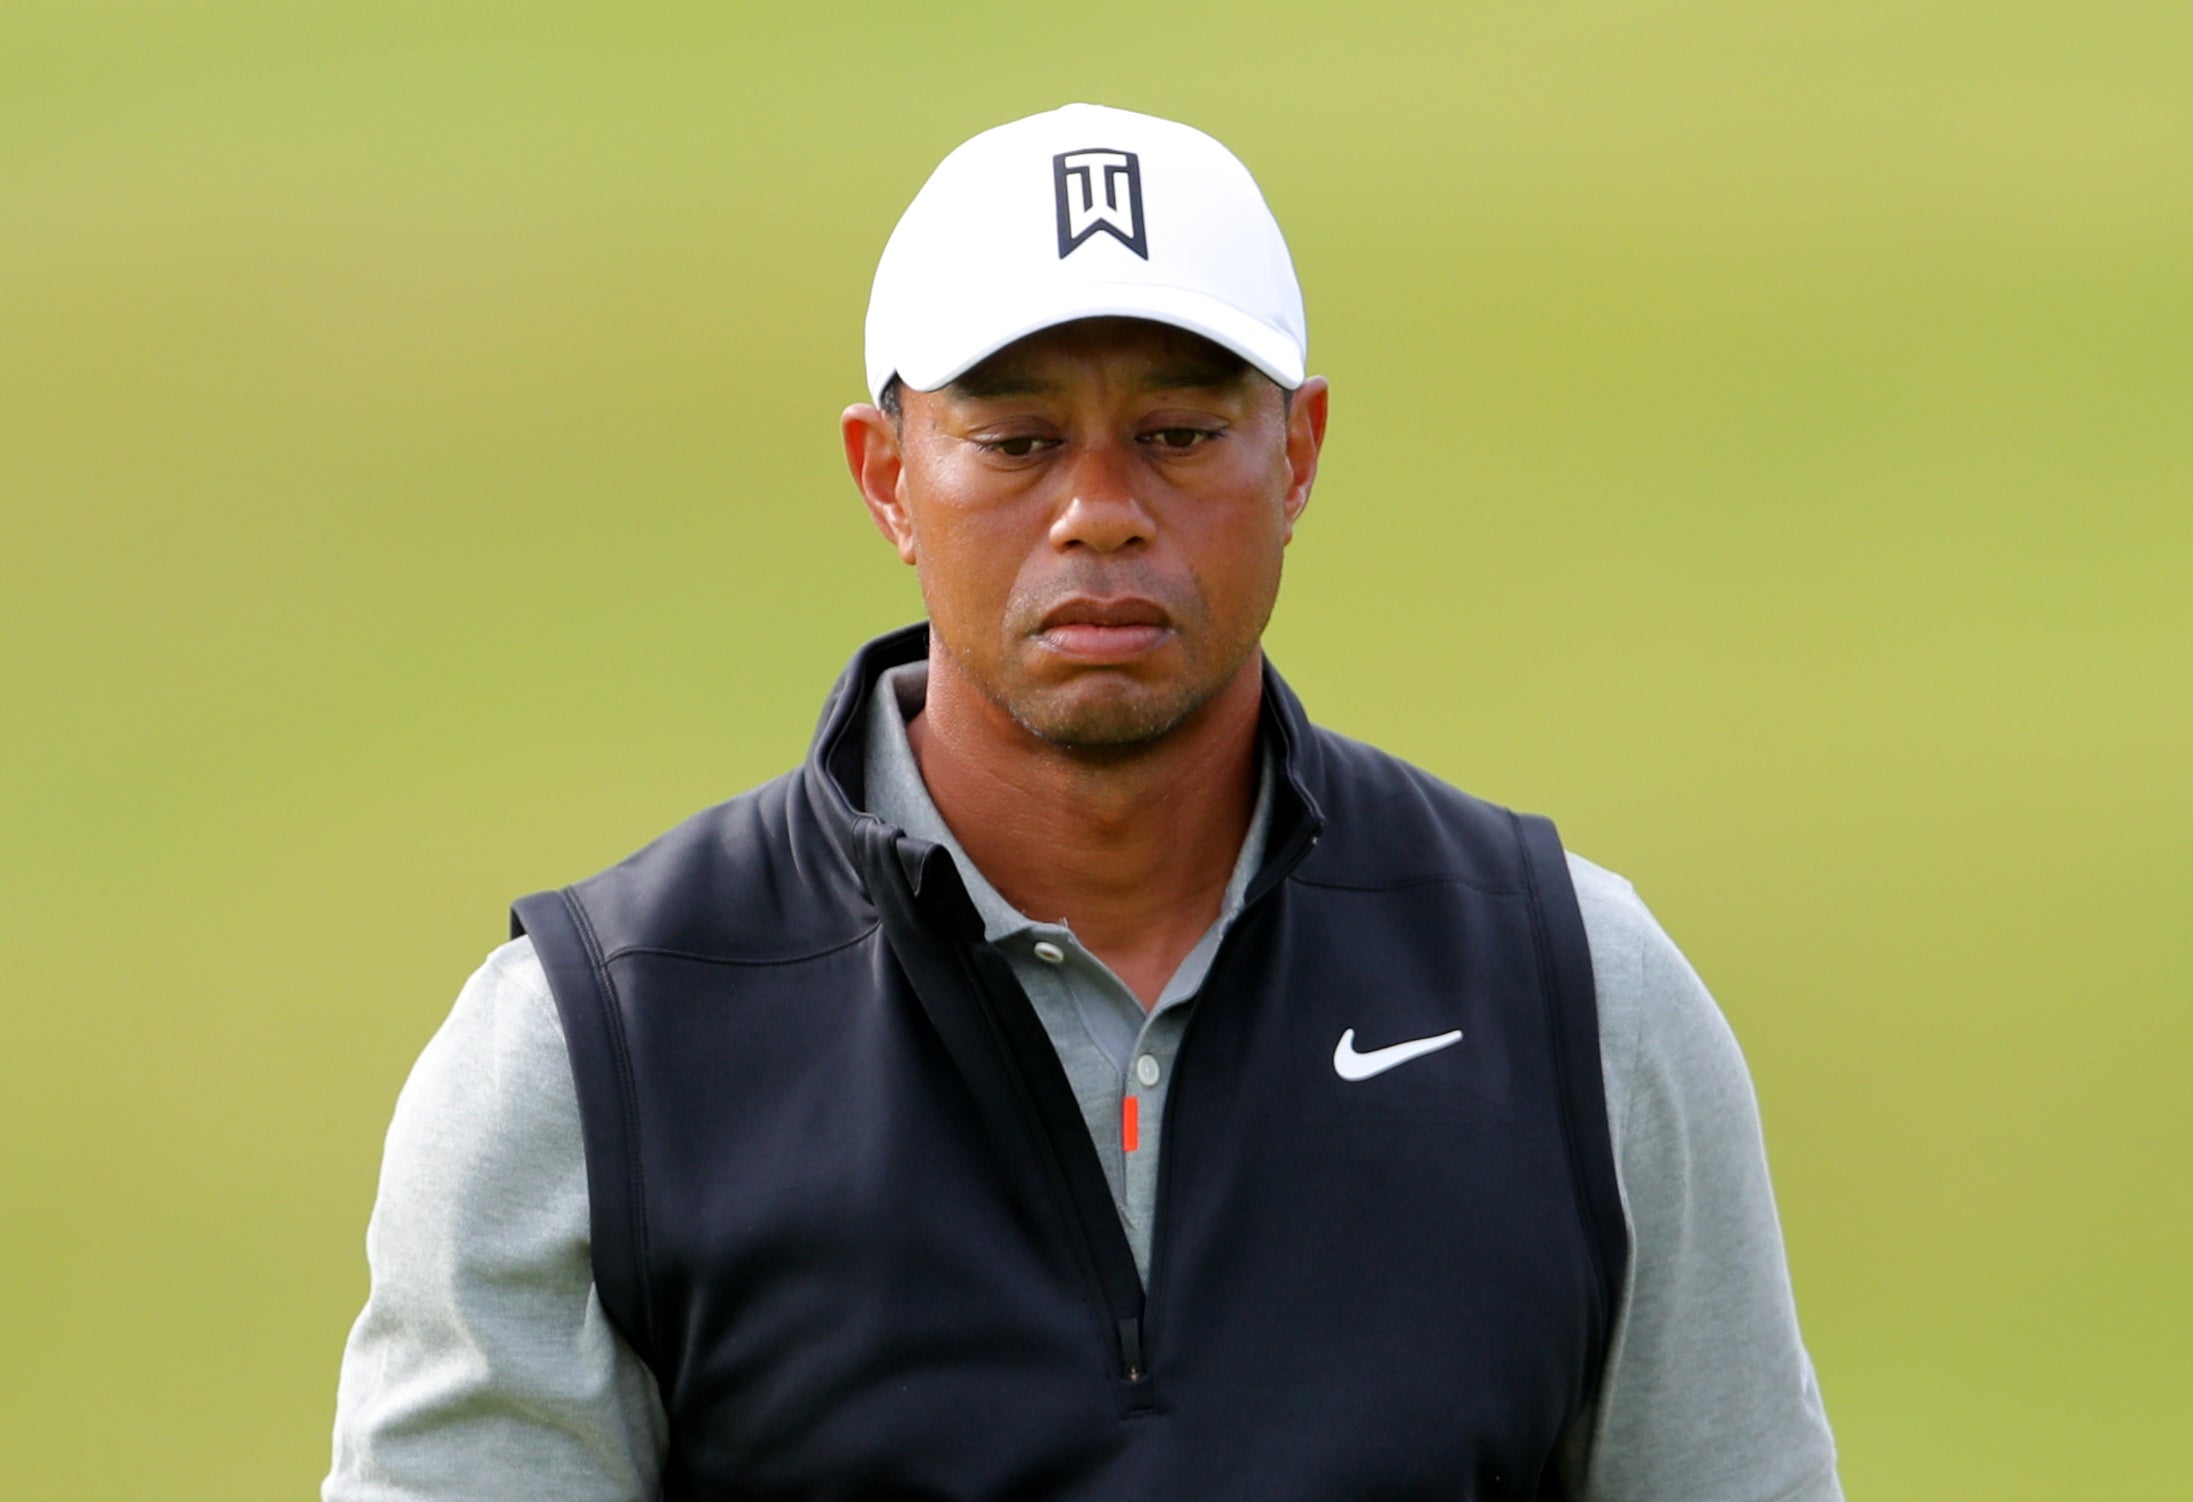 Tiger Woods suffered major injuries following a crash in Los Angeles in February